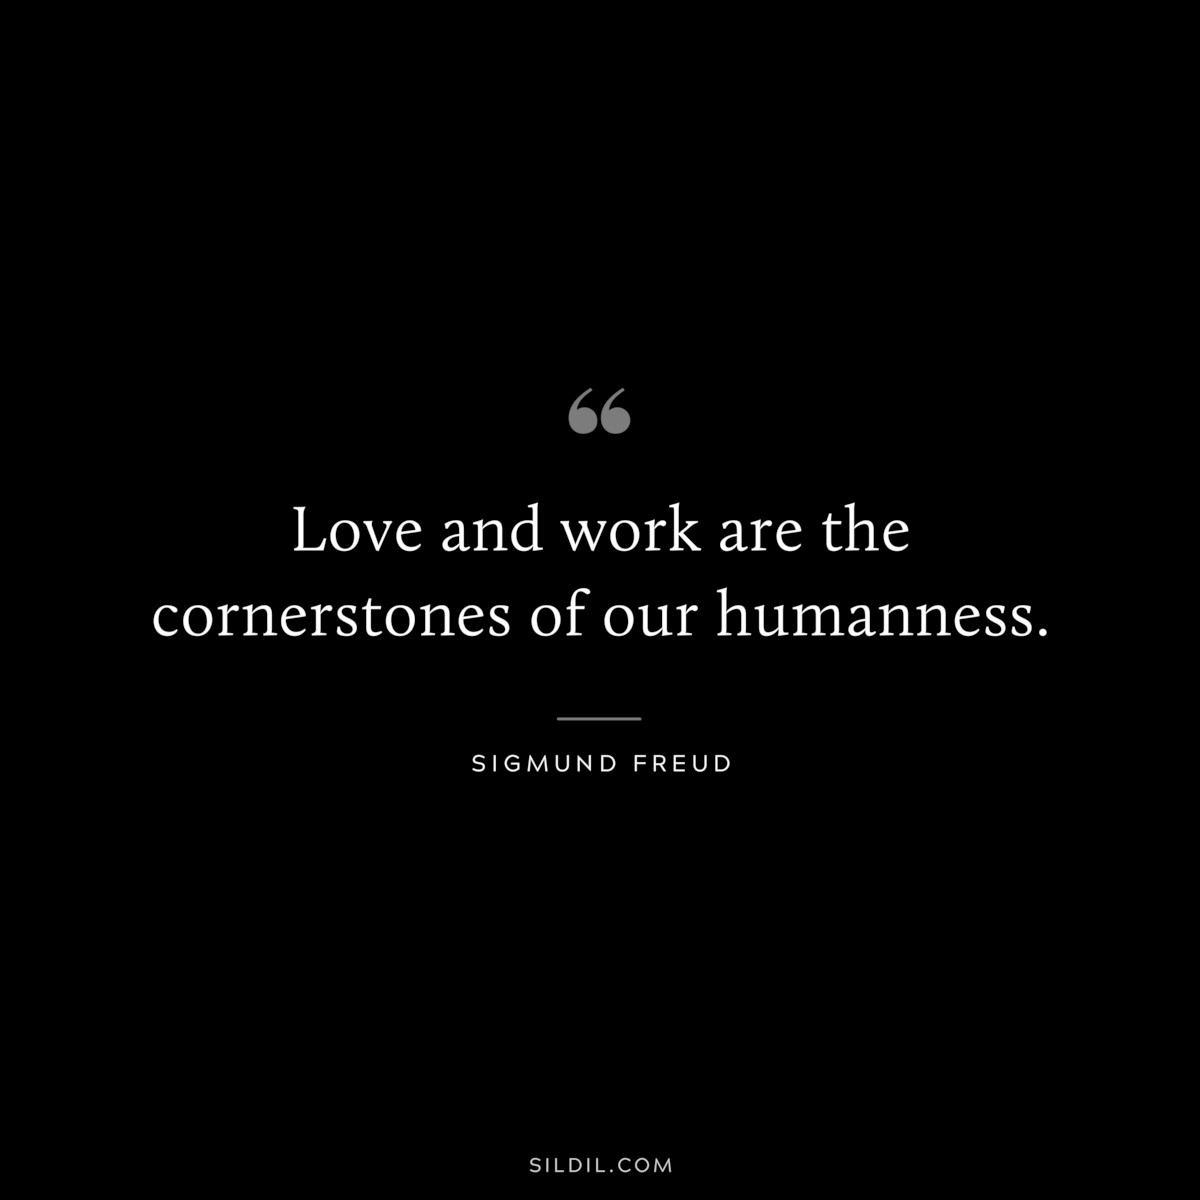 Love and work are the cornerstones of our humanness. ― Sigmund Frued